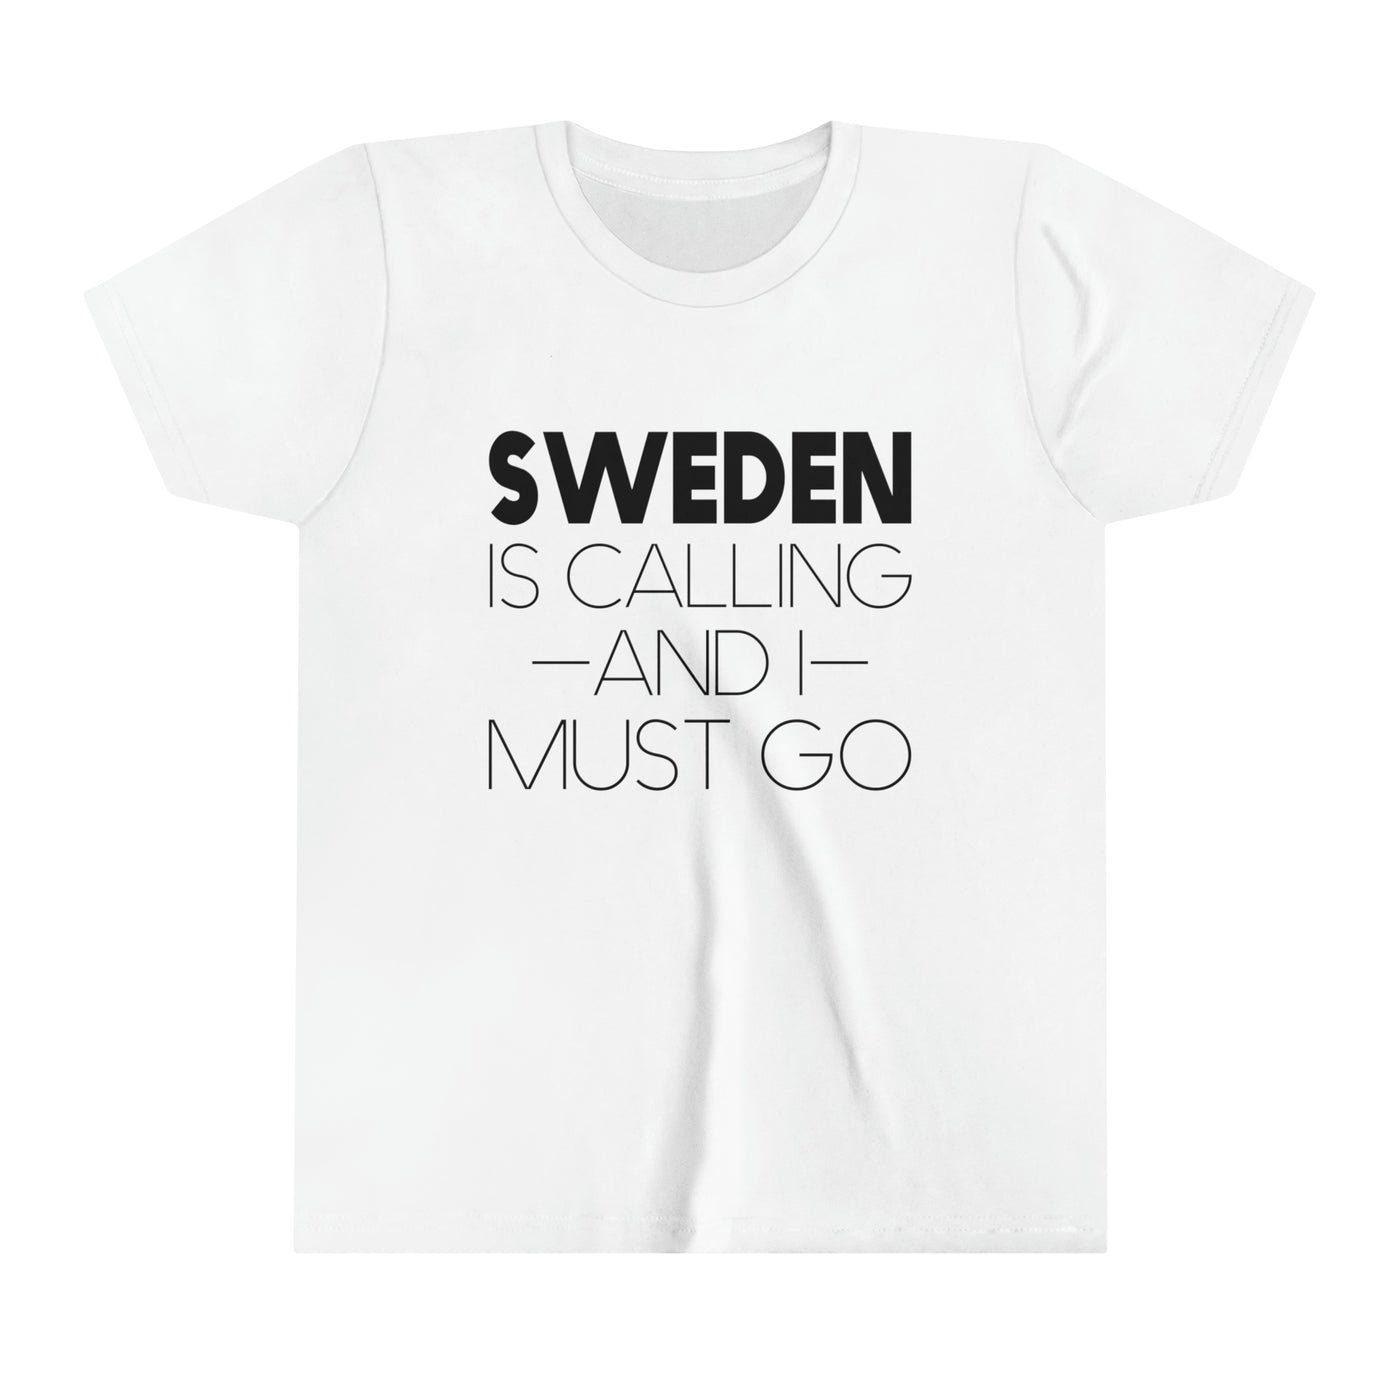 Sweden Is Calling And I Must Go Kids T-Shirt